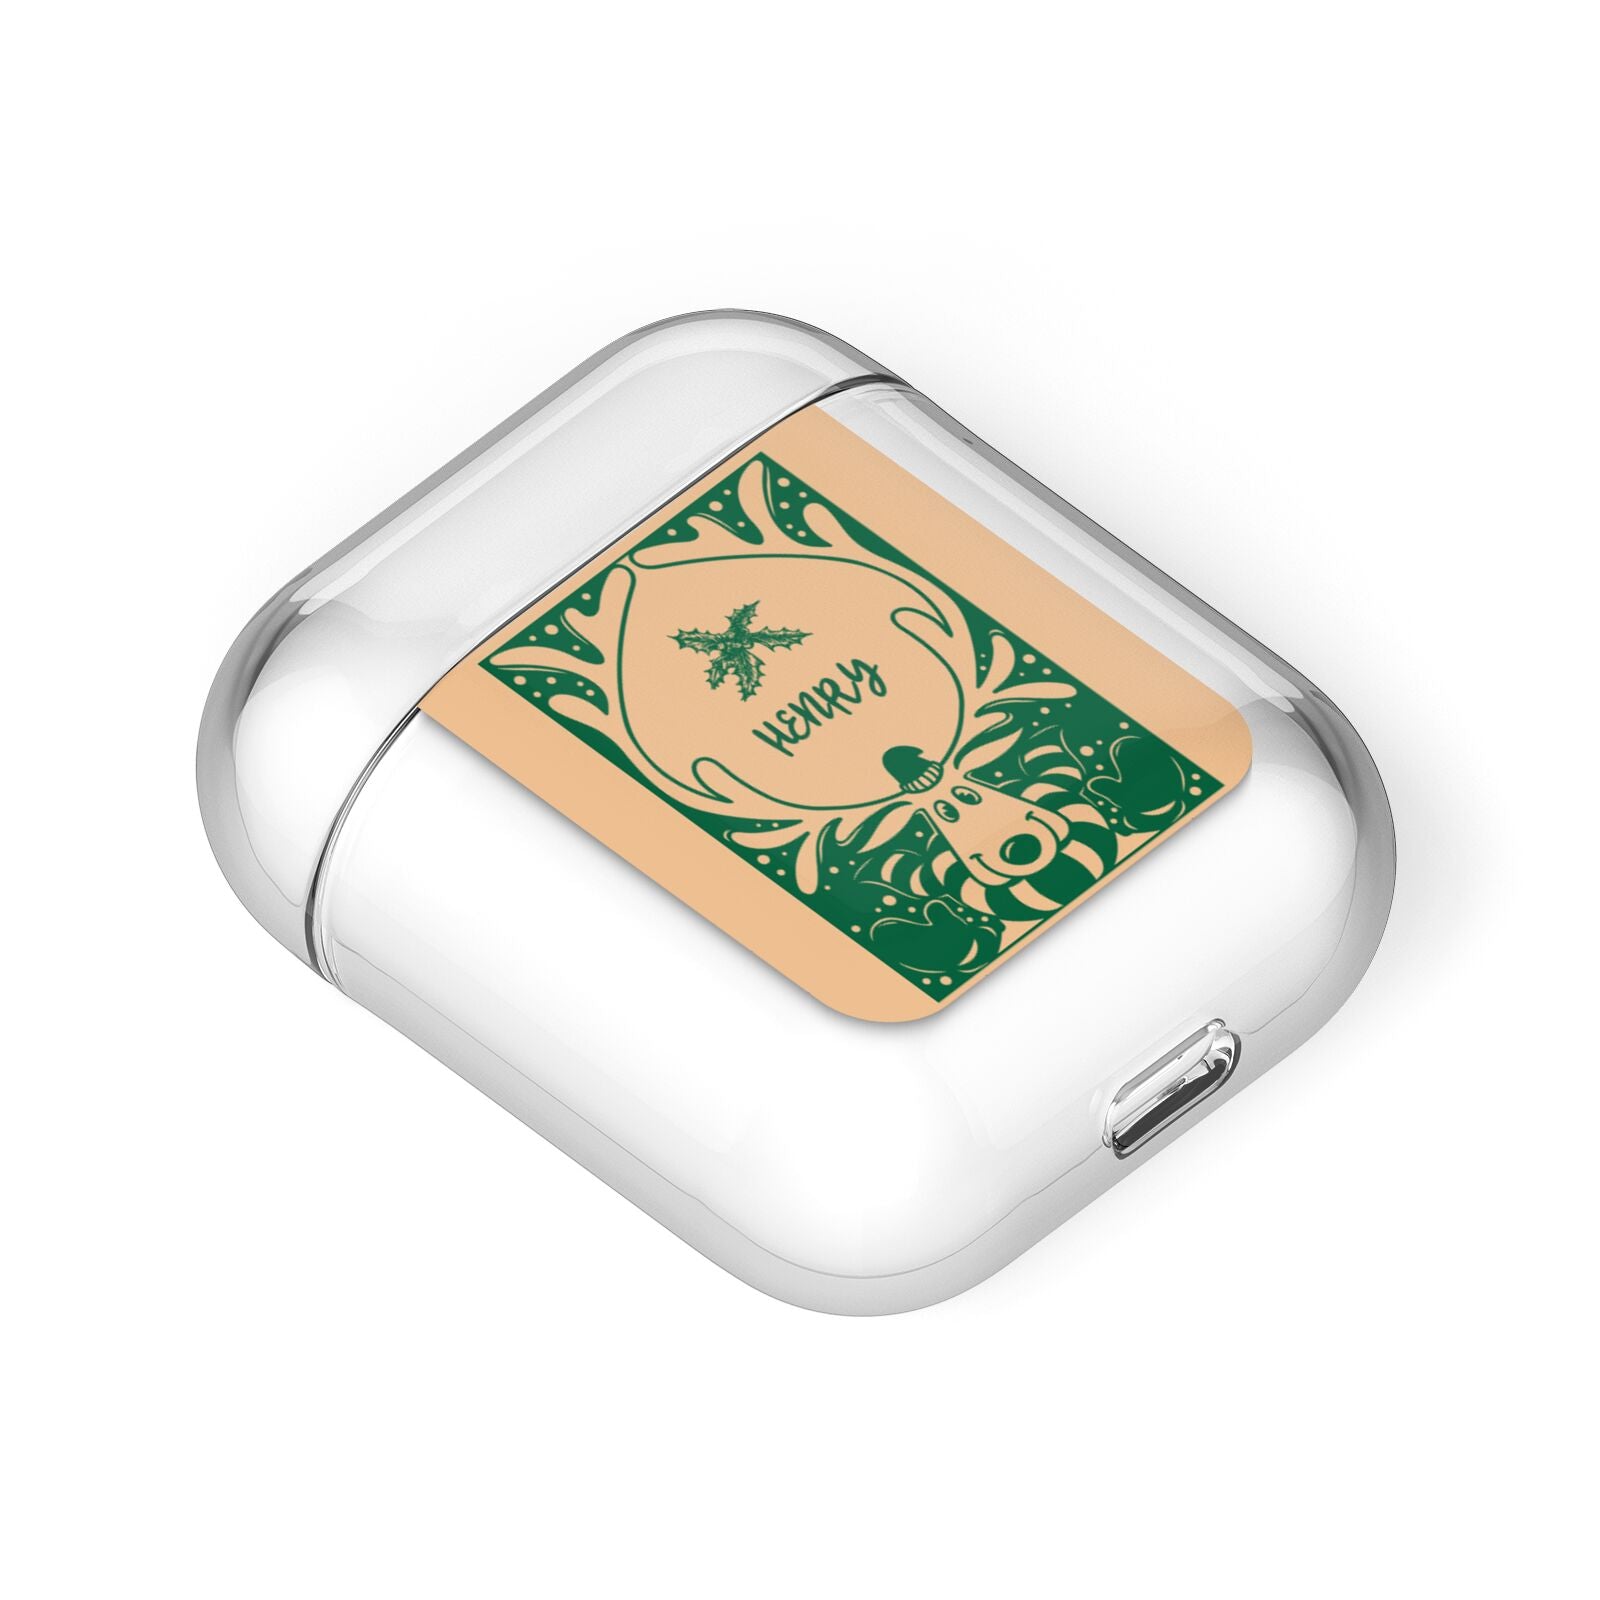 Rudolph Personalised AirPods Case Laid Flat